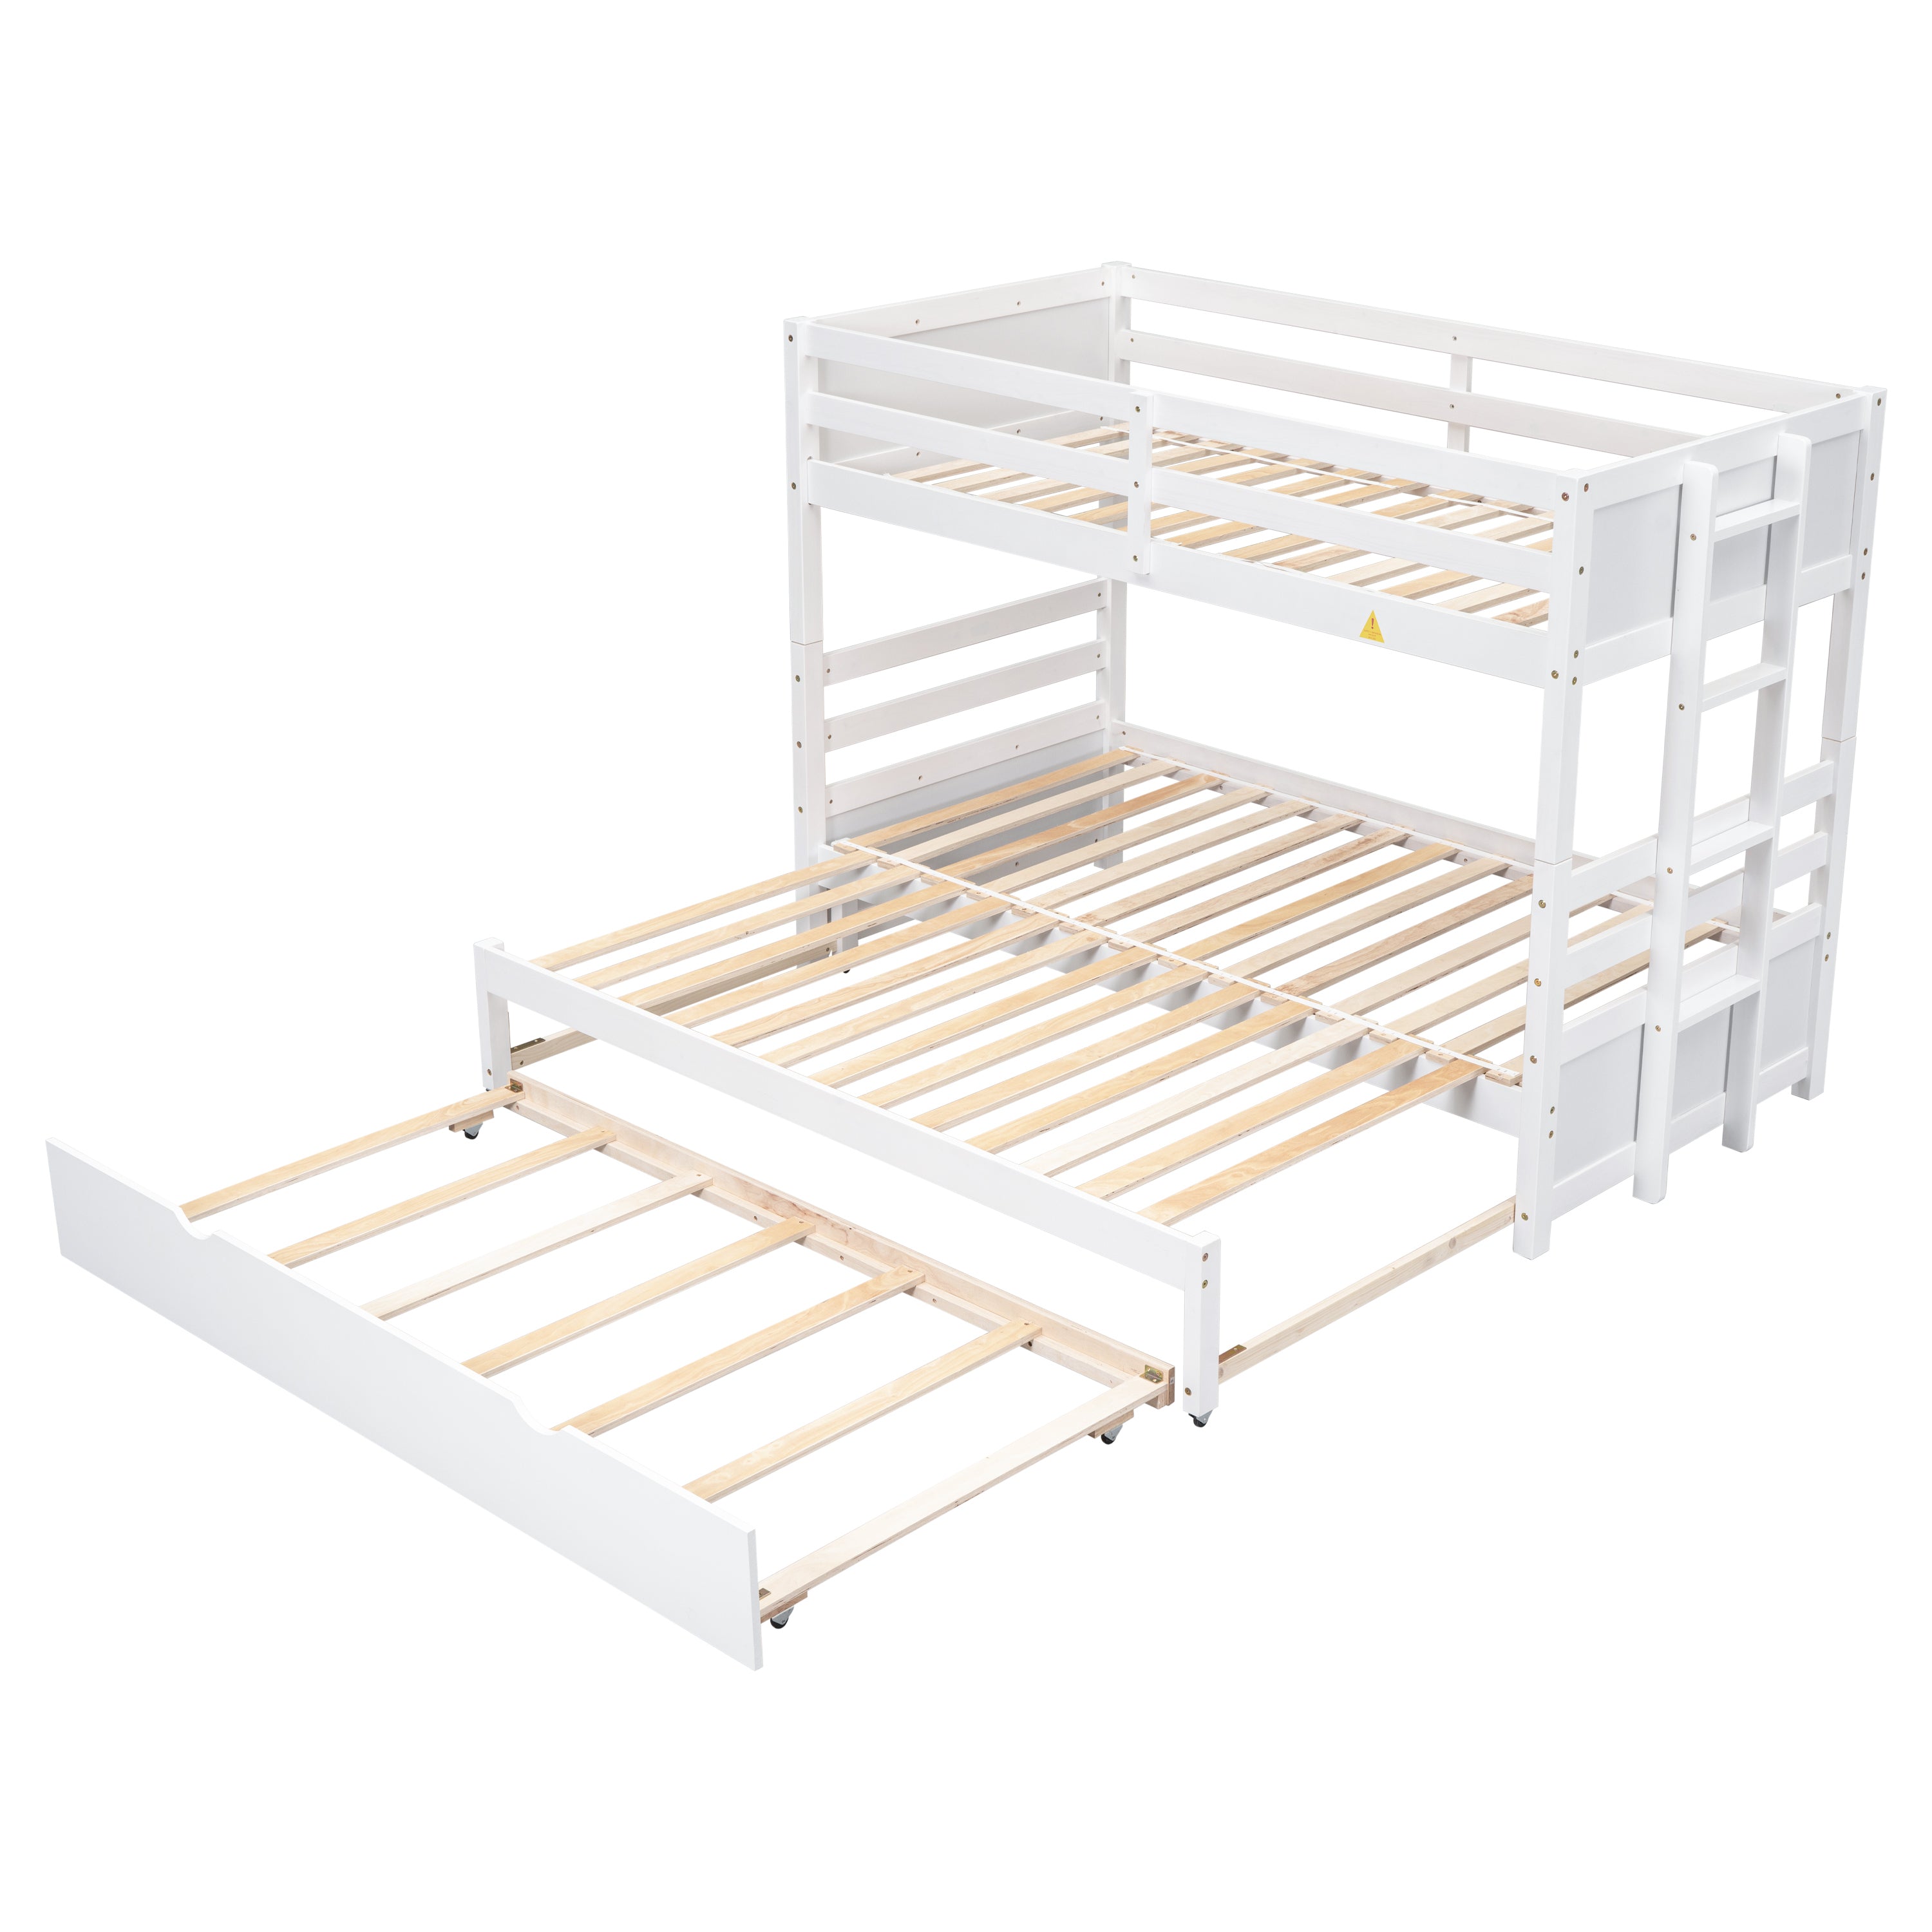 Twin over Pull-out Bunk Bed with Trundle, White